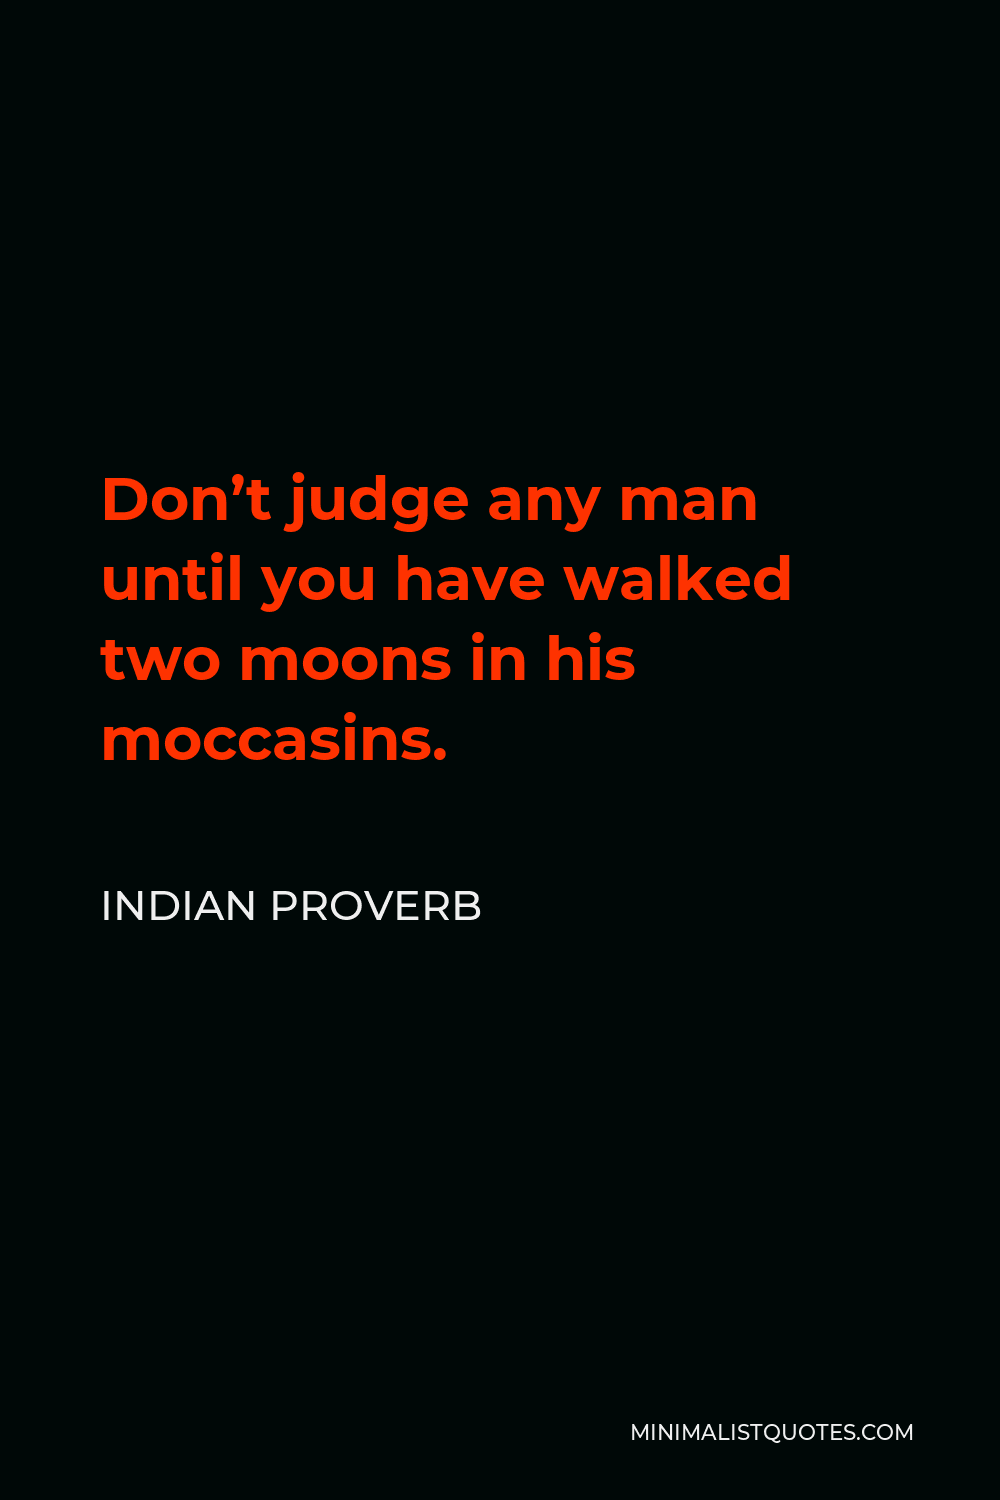 Indian Proverb Quote - Don’t judge any man until you have walked two moons in his moccasins.